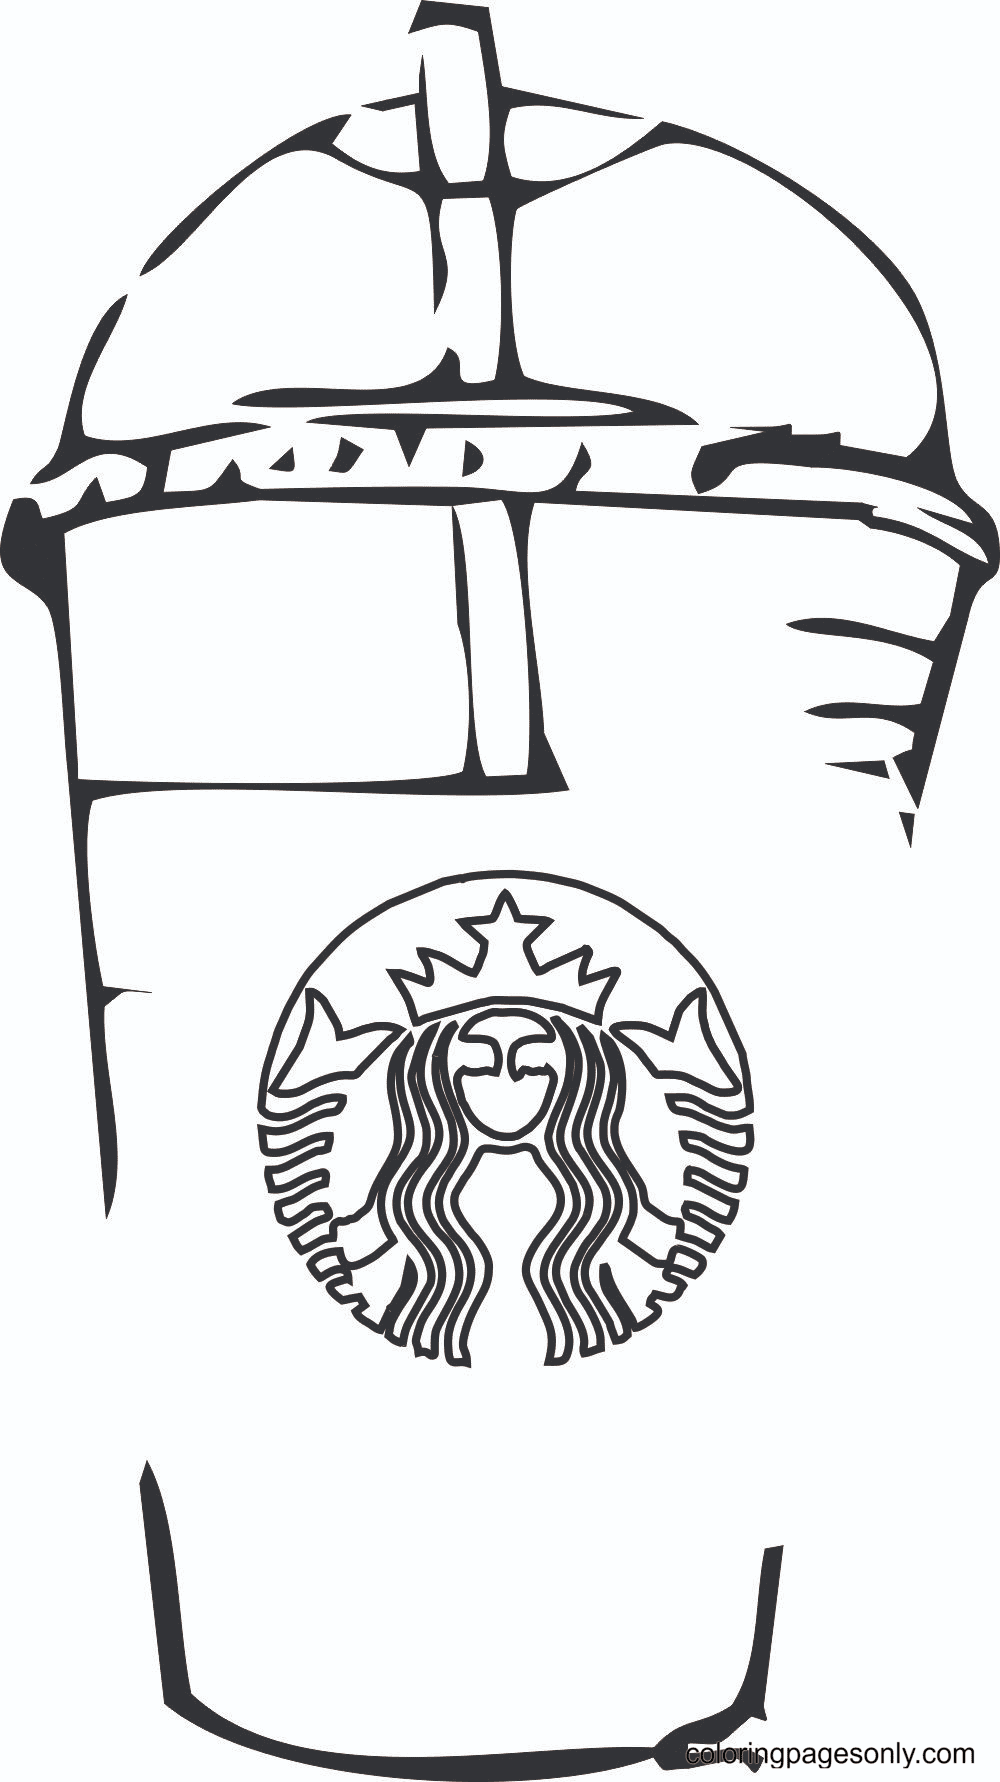 Starbucks Coffee Cup Printable Coloring Pages - Starbucks Coloring Pages - Coloring  Pages For Kids And Adults